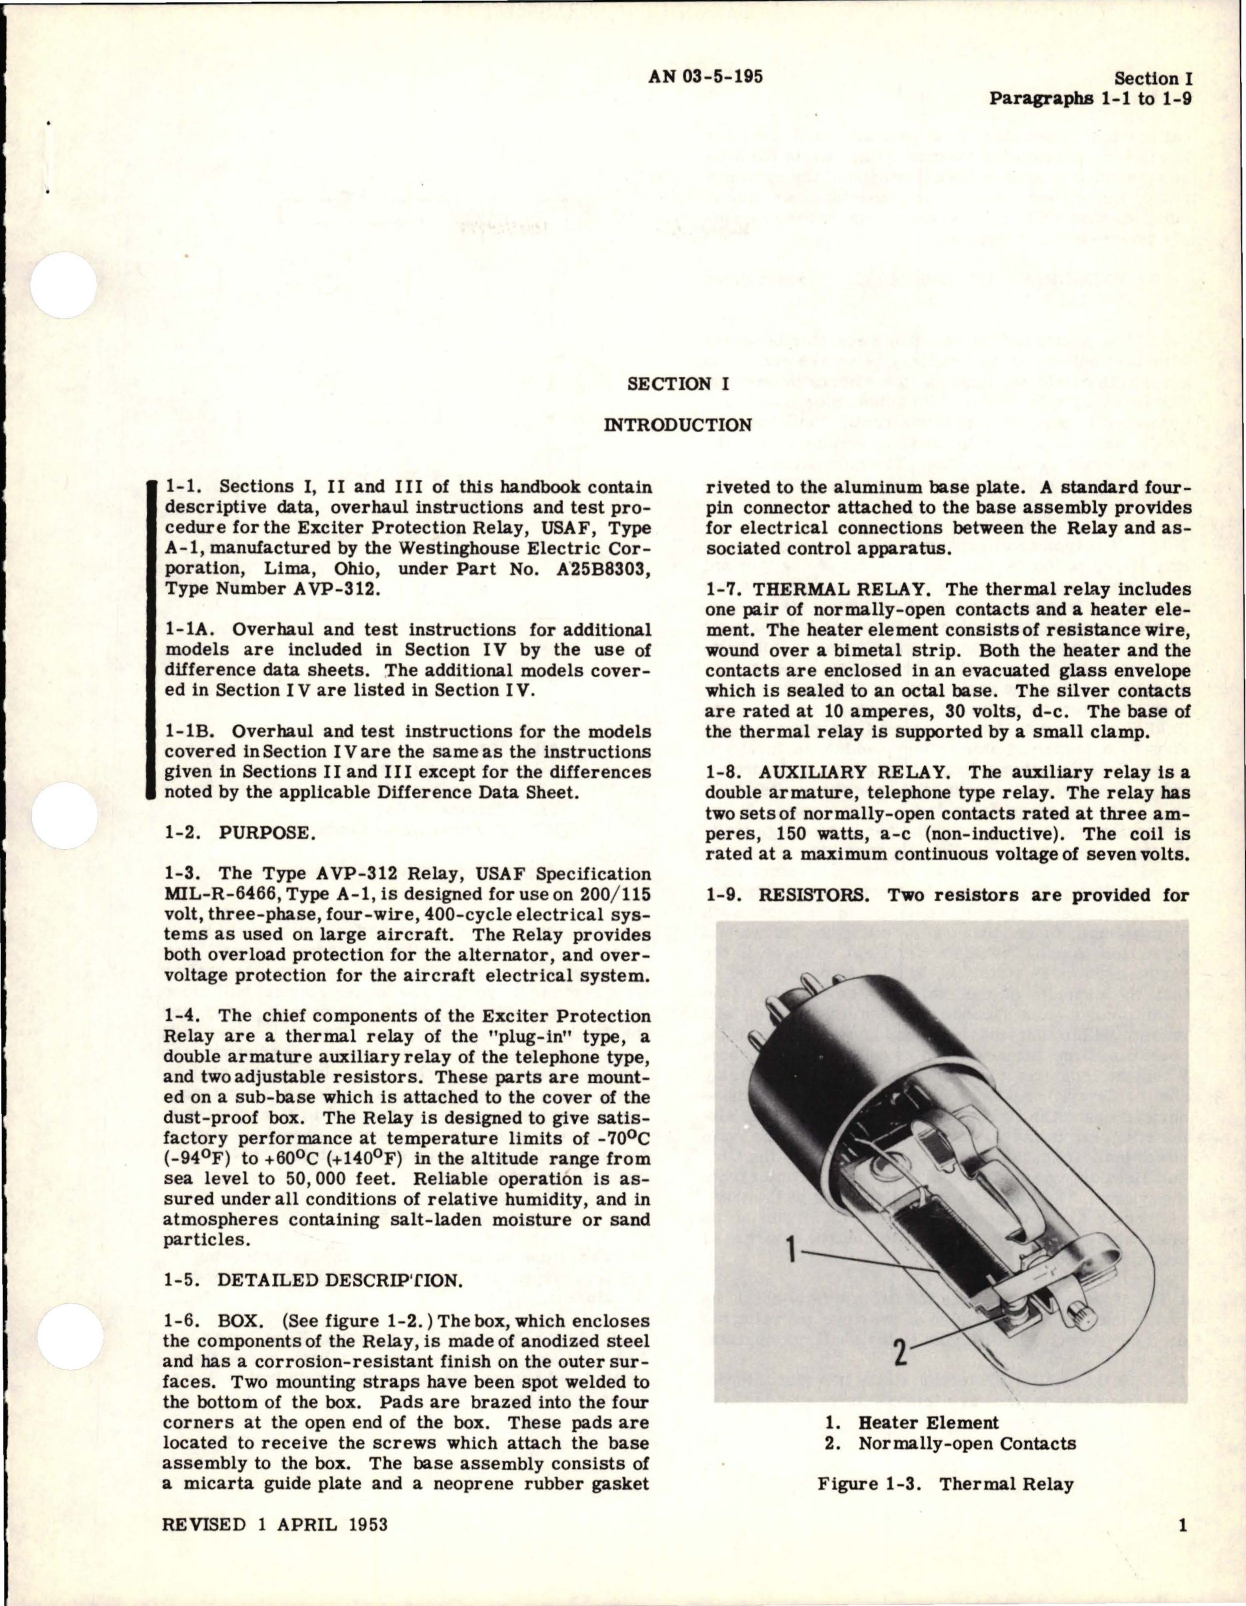 Sample page 5 from AirCorps Library document: Overhaul Instructions for Exciter Protection Relays - Models A25B303 (USAF Type A-1) and A35A9126 